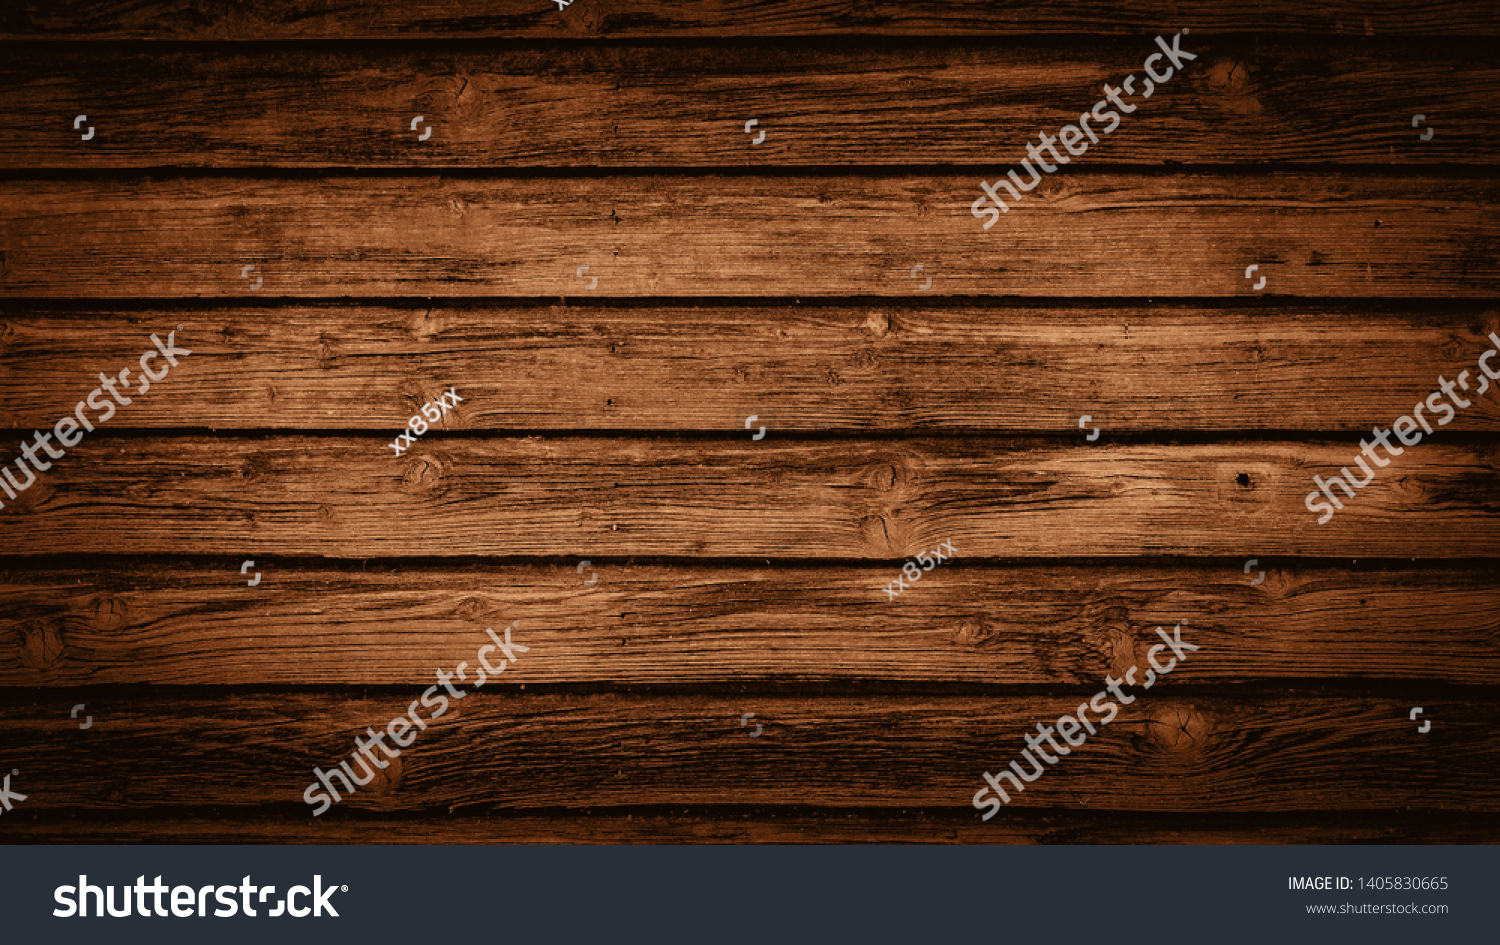 
old Wood texture background , wooden boards, wooden floors, blackforest shabby vintage rustic, wooden texture
 #1405830665